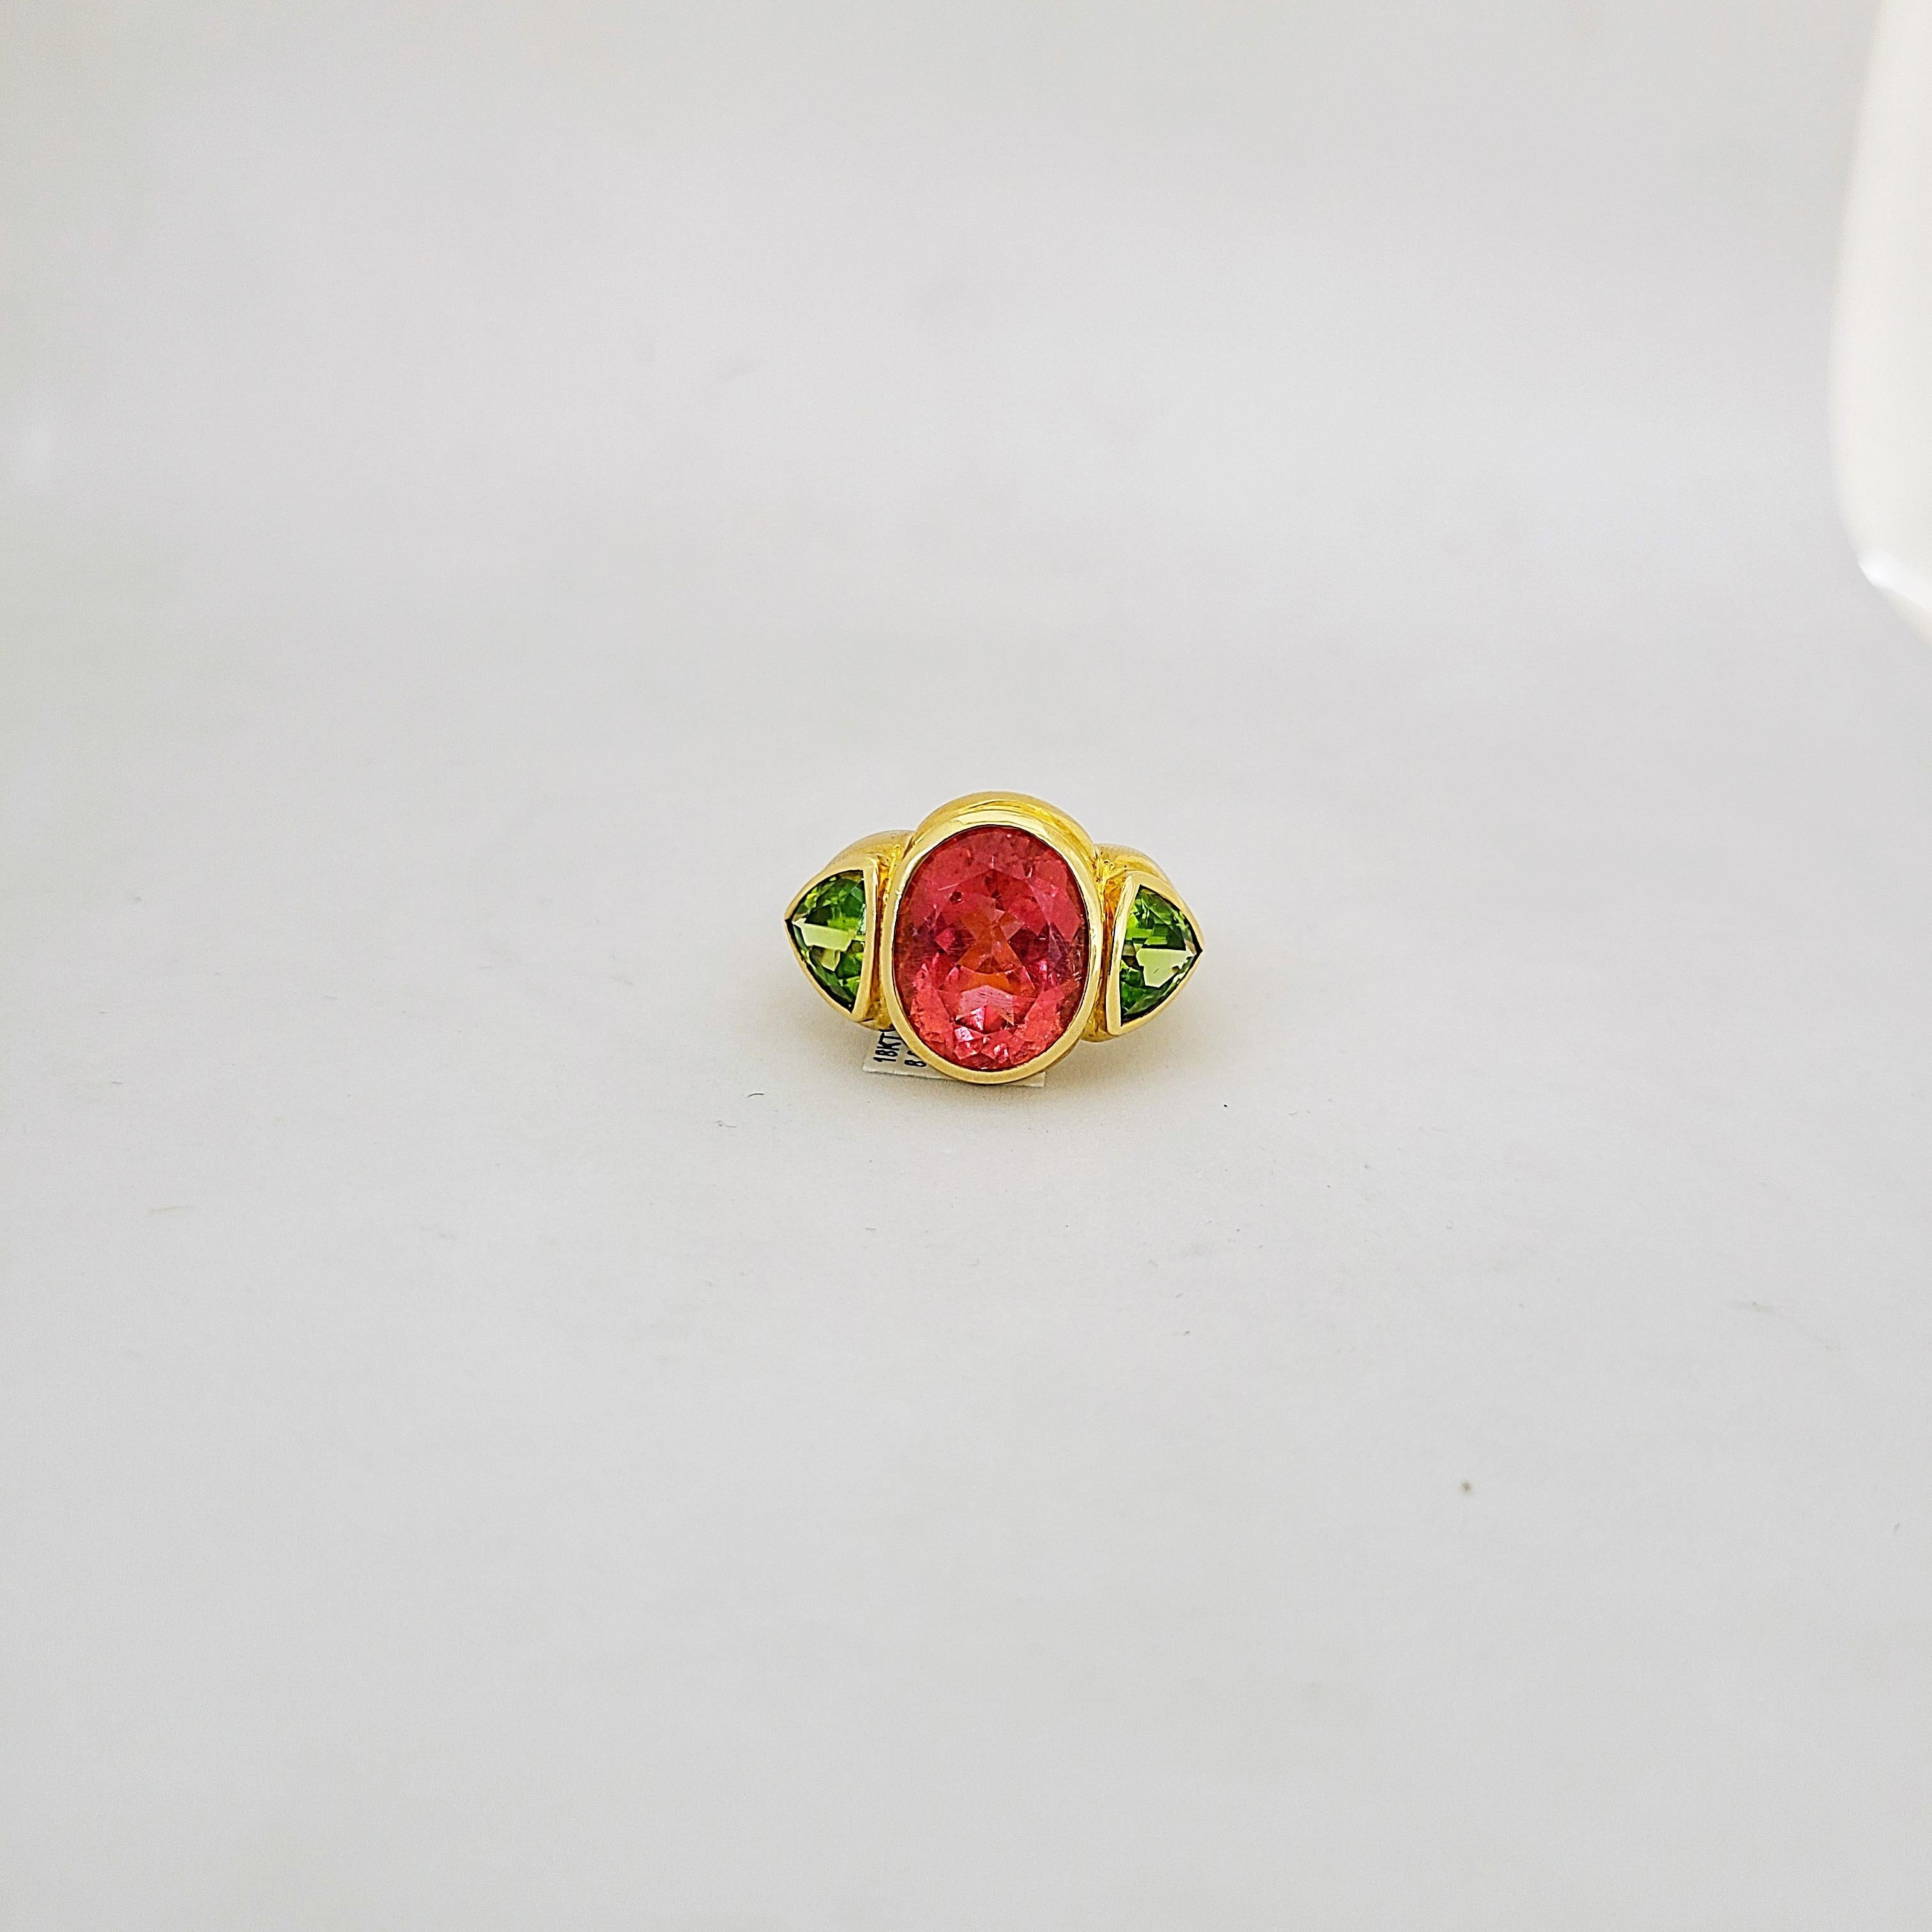 Cellini 18KT Yellow Gold Ring with 8.05 Carat Rubellite and 3.46 Carat Peridot For Sale 2